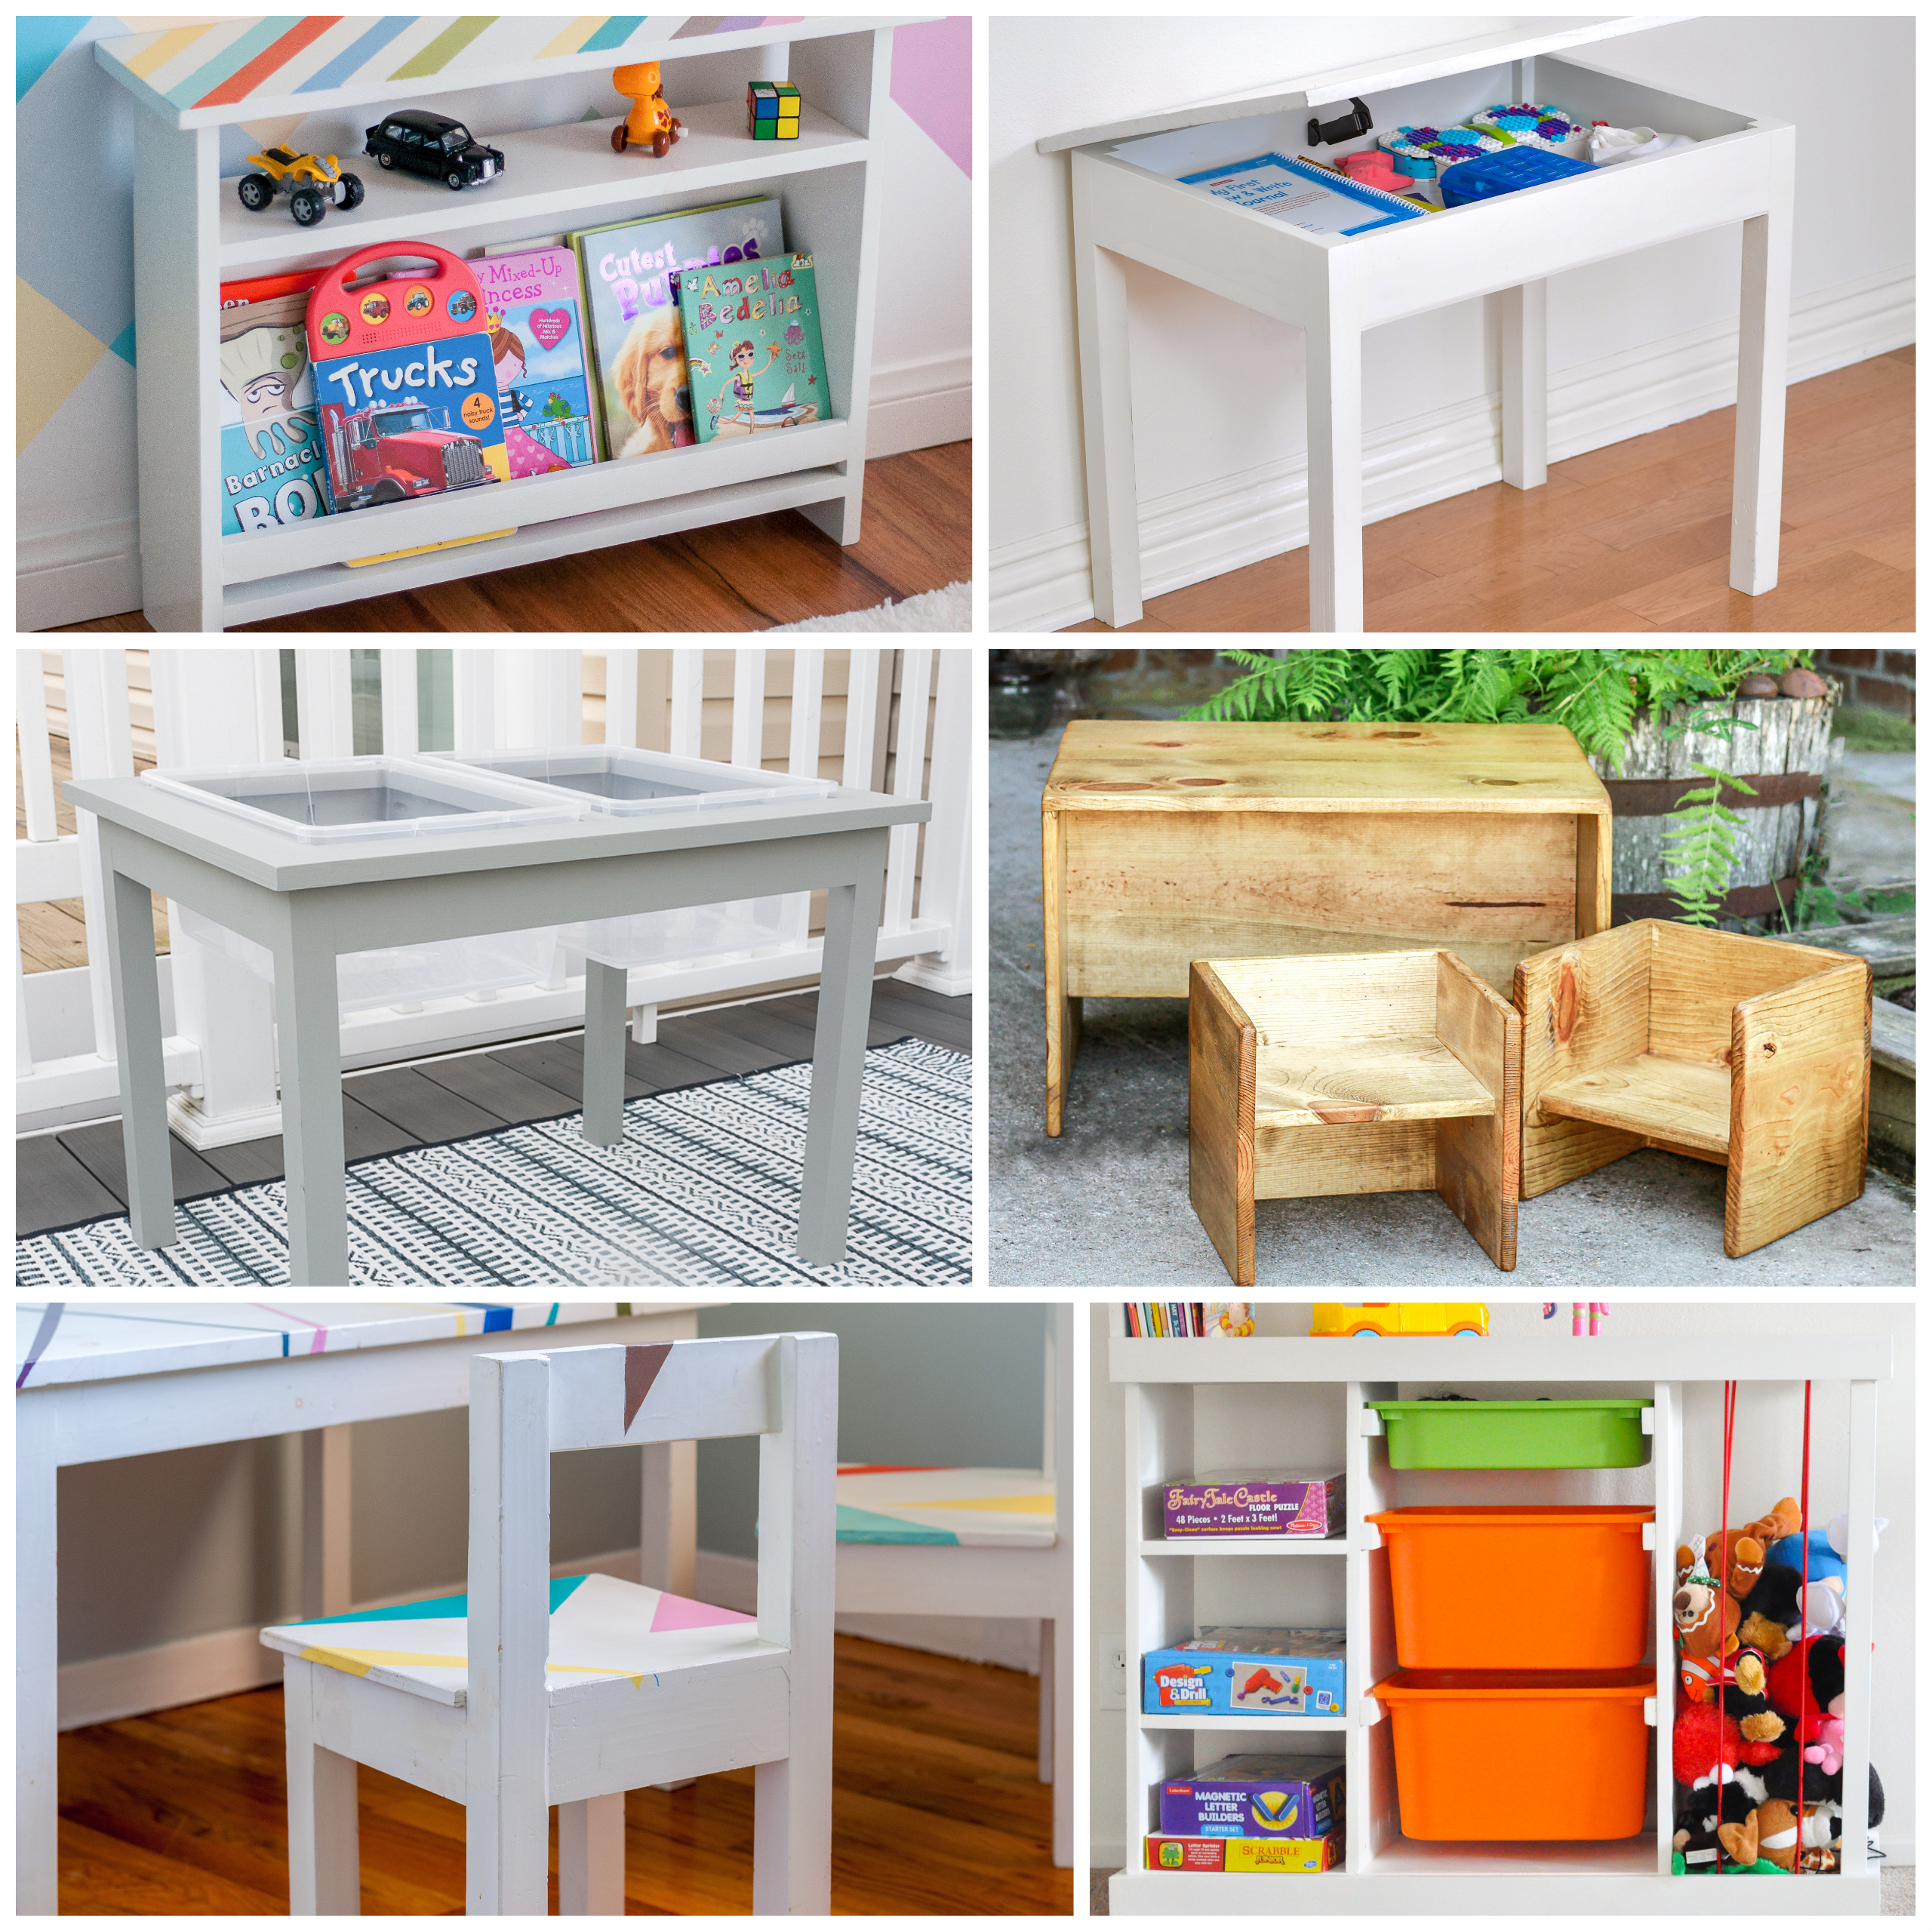 53 DIY Furniture Ideas to Personalize Your Home